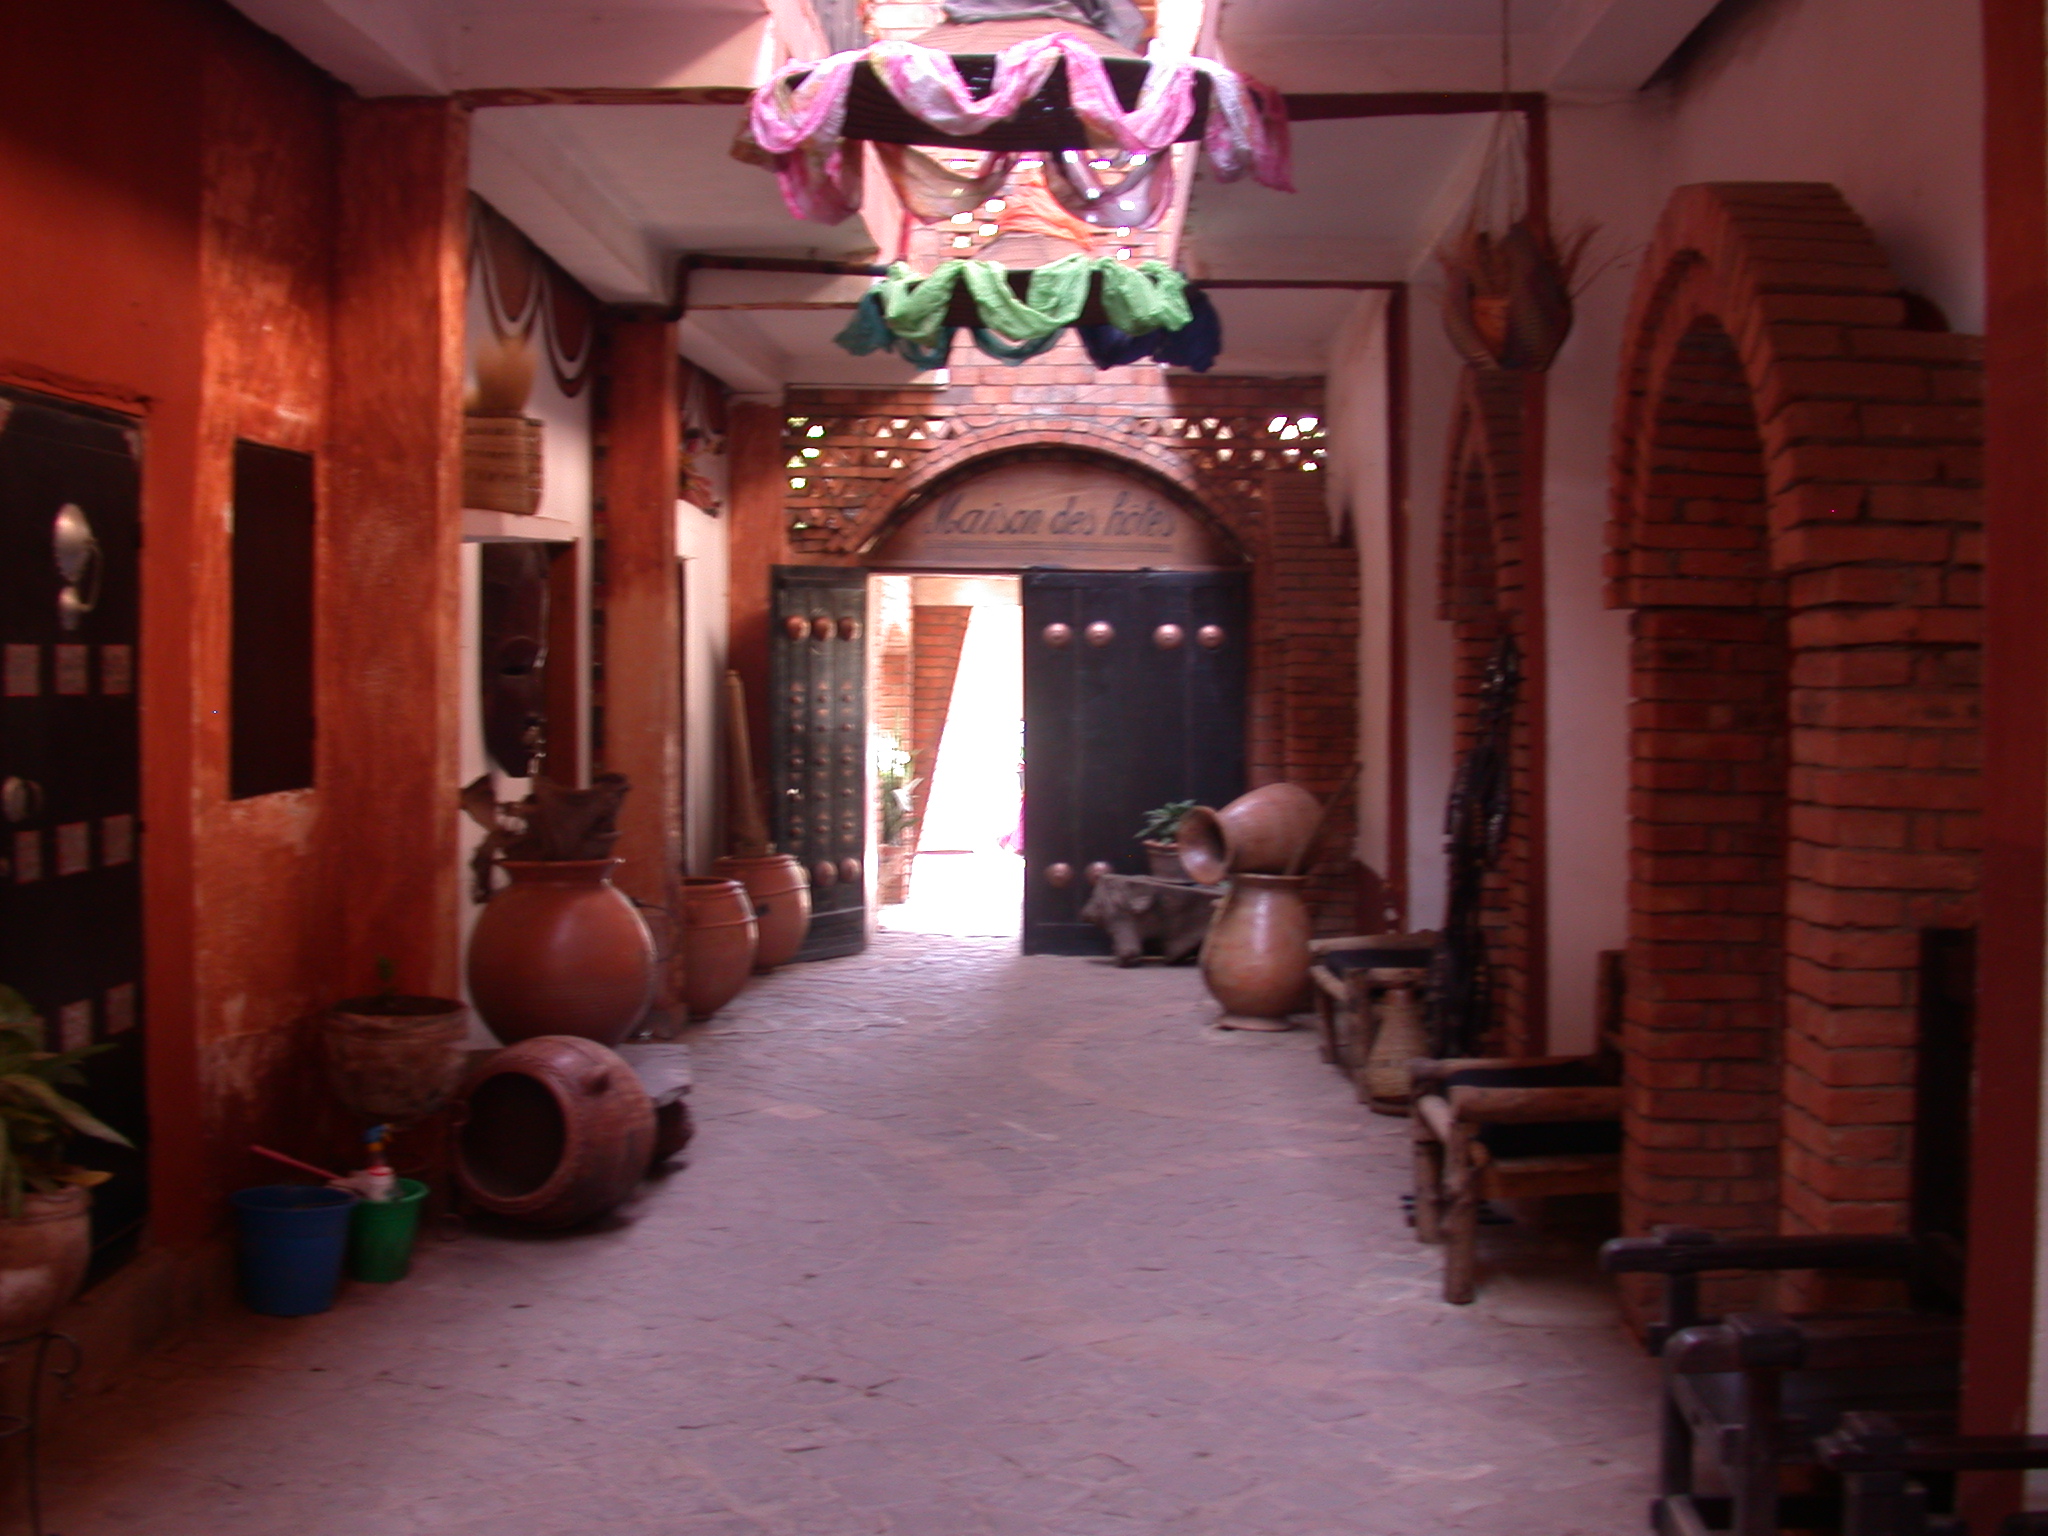 View From Main Downstairs Corridor to Front Entrance, Hotel Djenne, Bamako, Mali